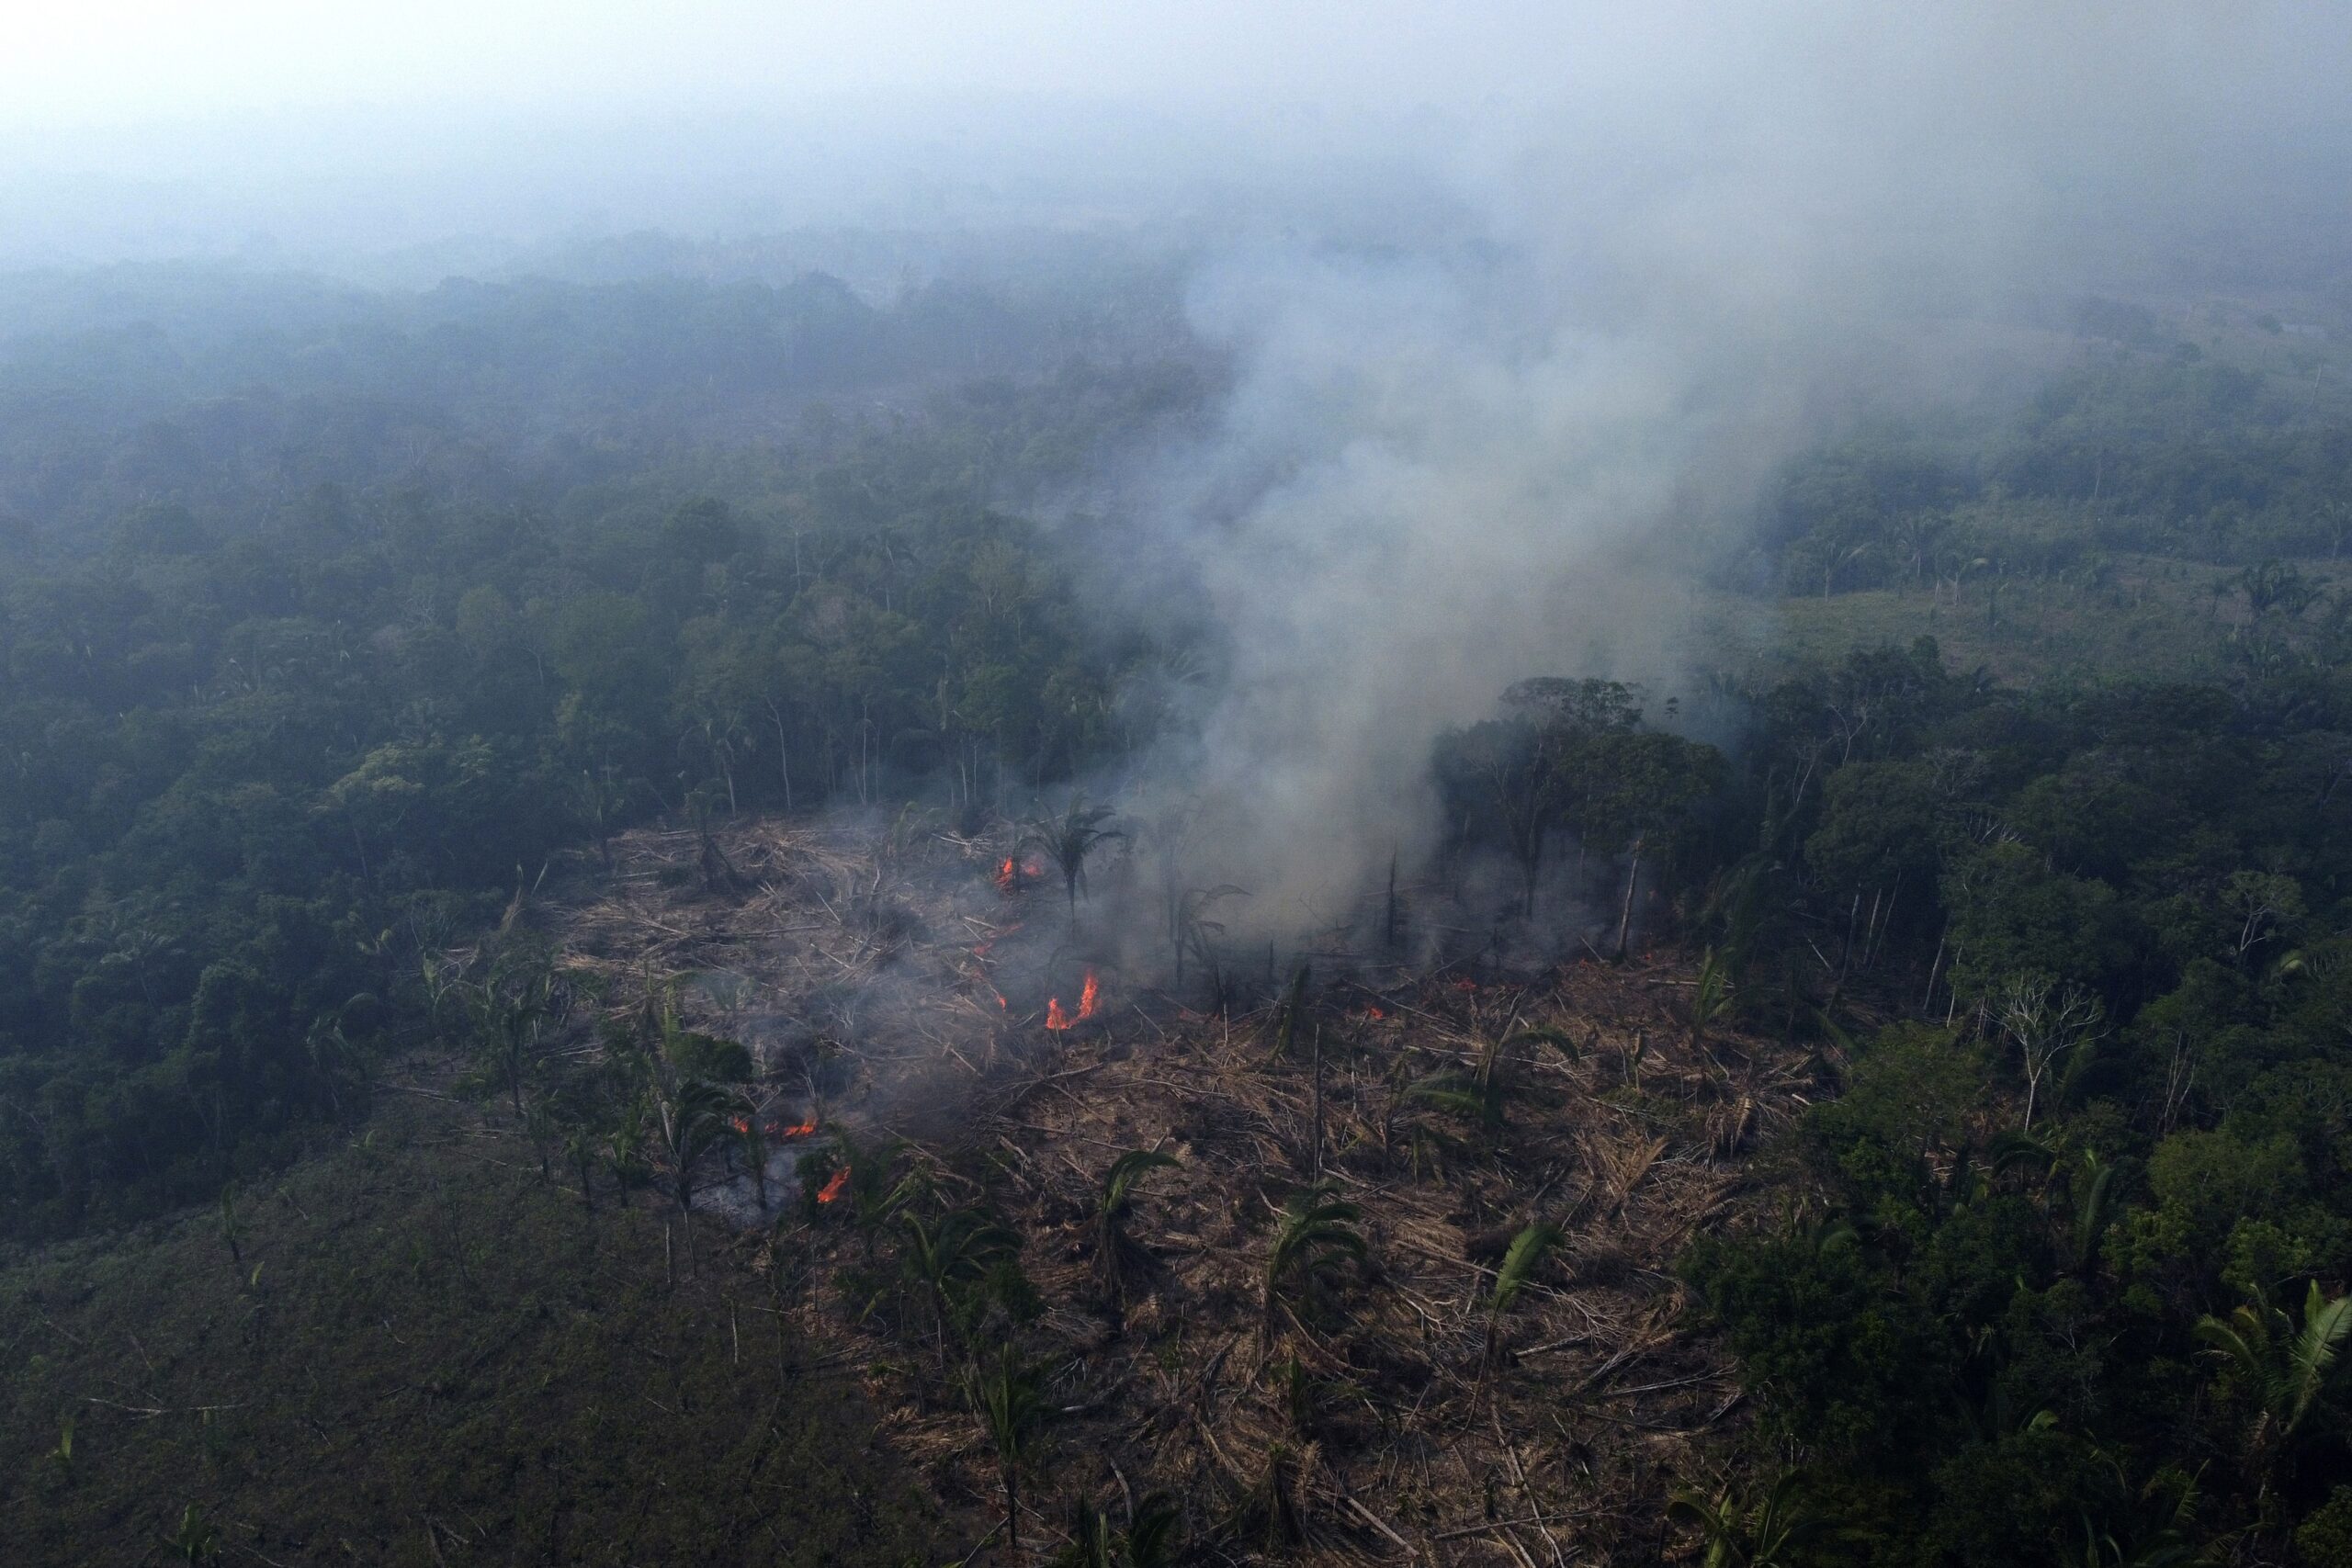 As rainforests worldwide disappear, burn and degrade, a summit to protect them opens in the Republic of Congo